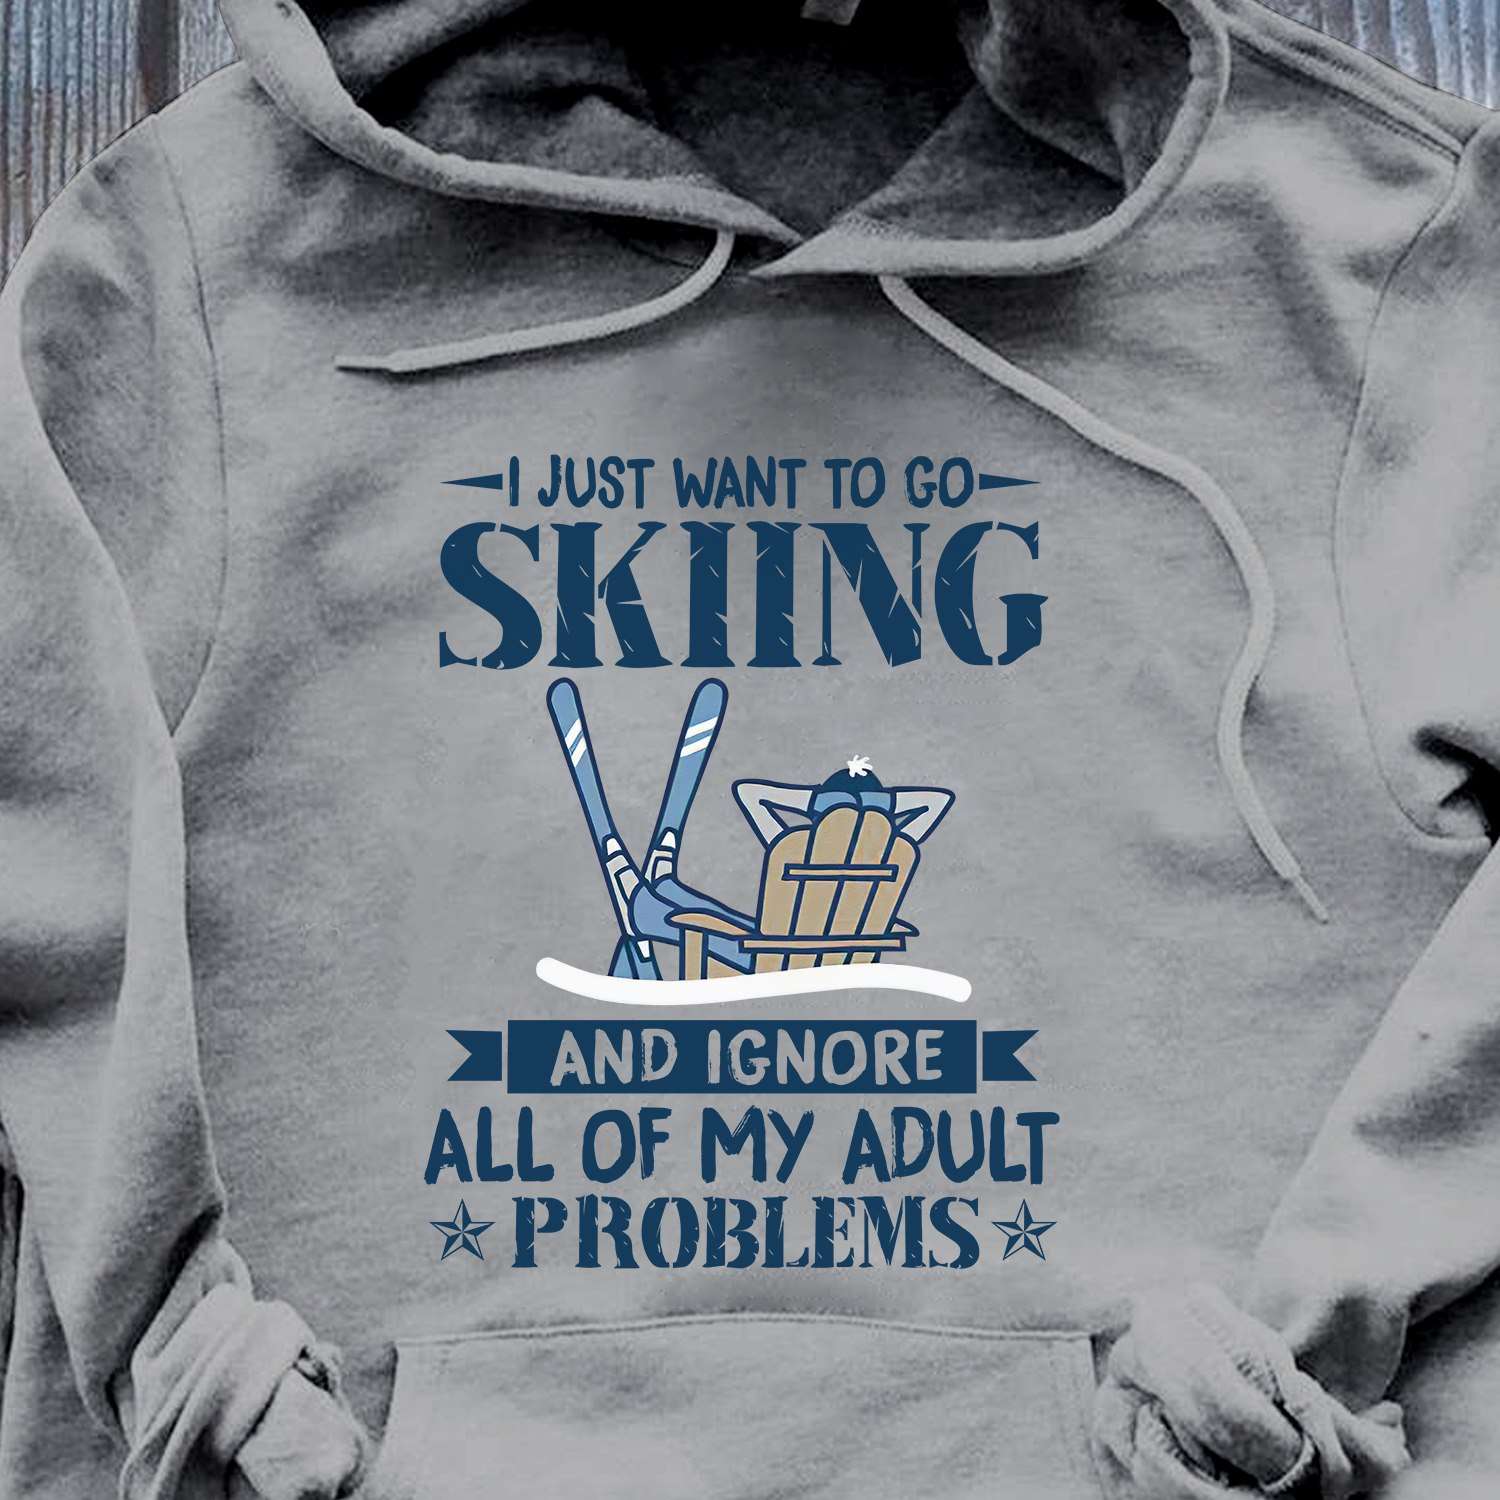 I just want to go skiing and ignore all of my adult problems - Gift for skier